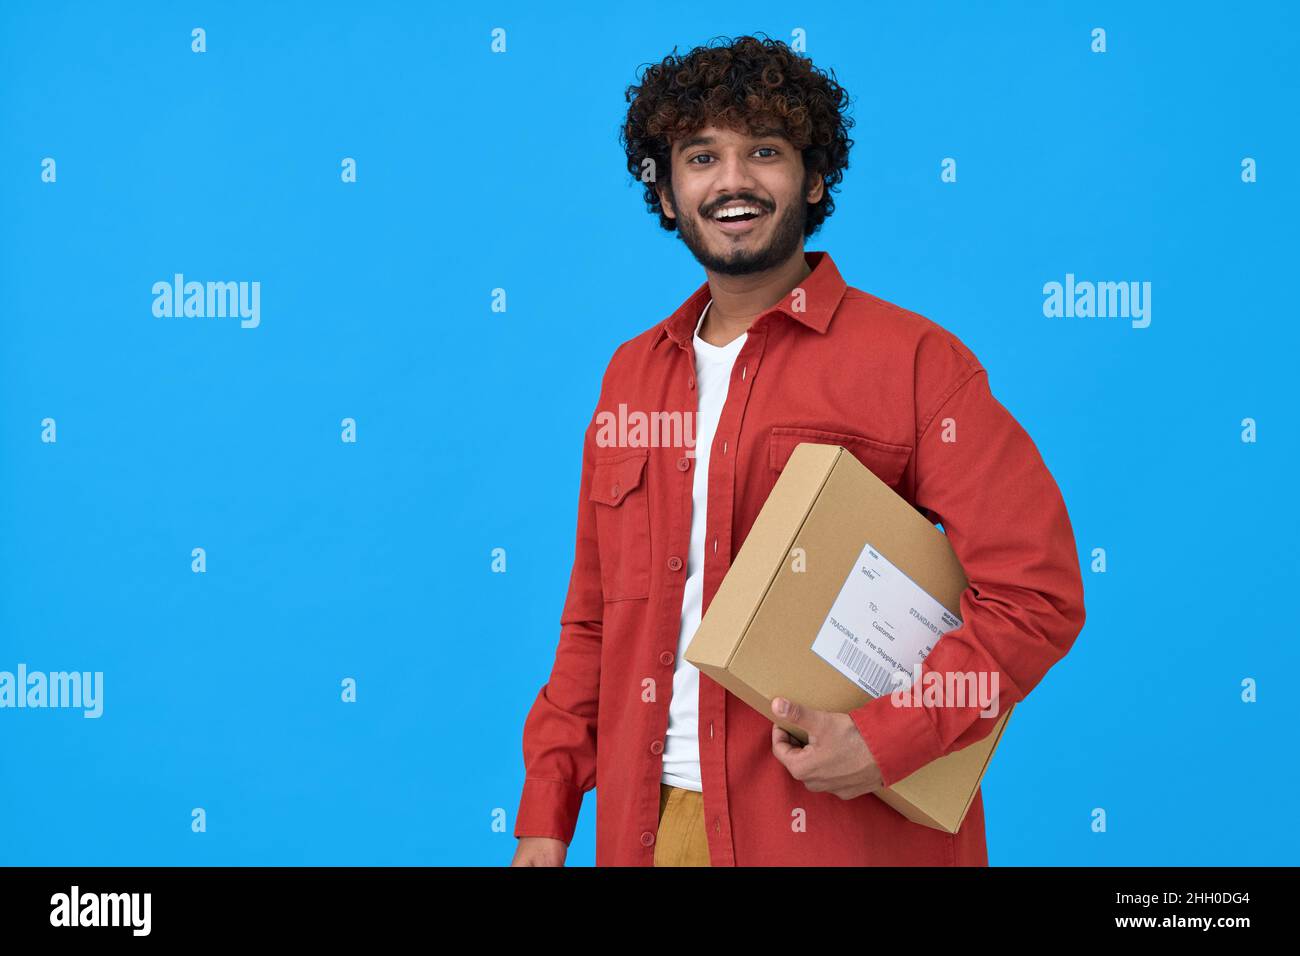 Happy indian young man holding parcel box isolated on blue background. Stock Photo